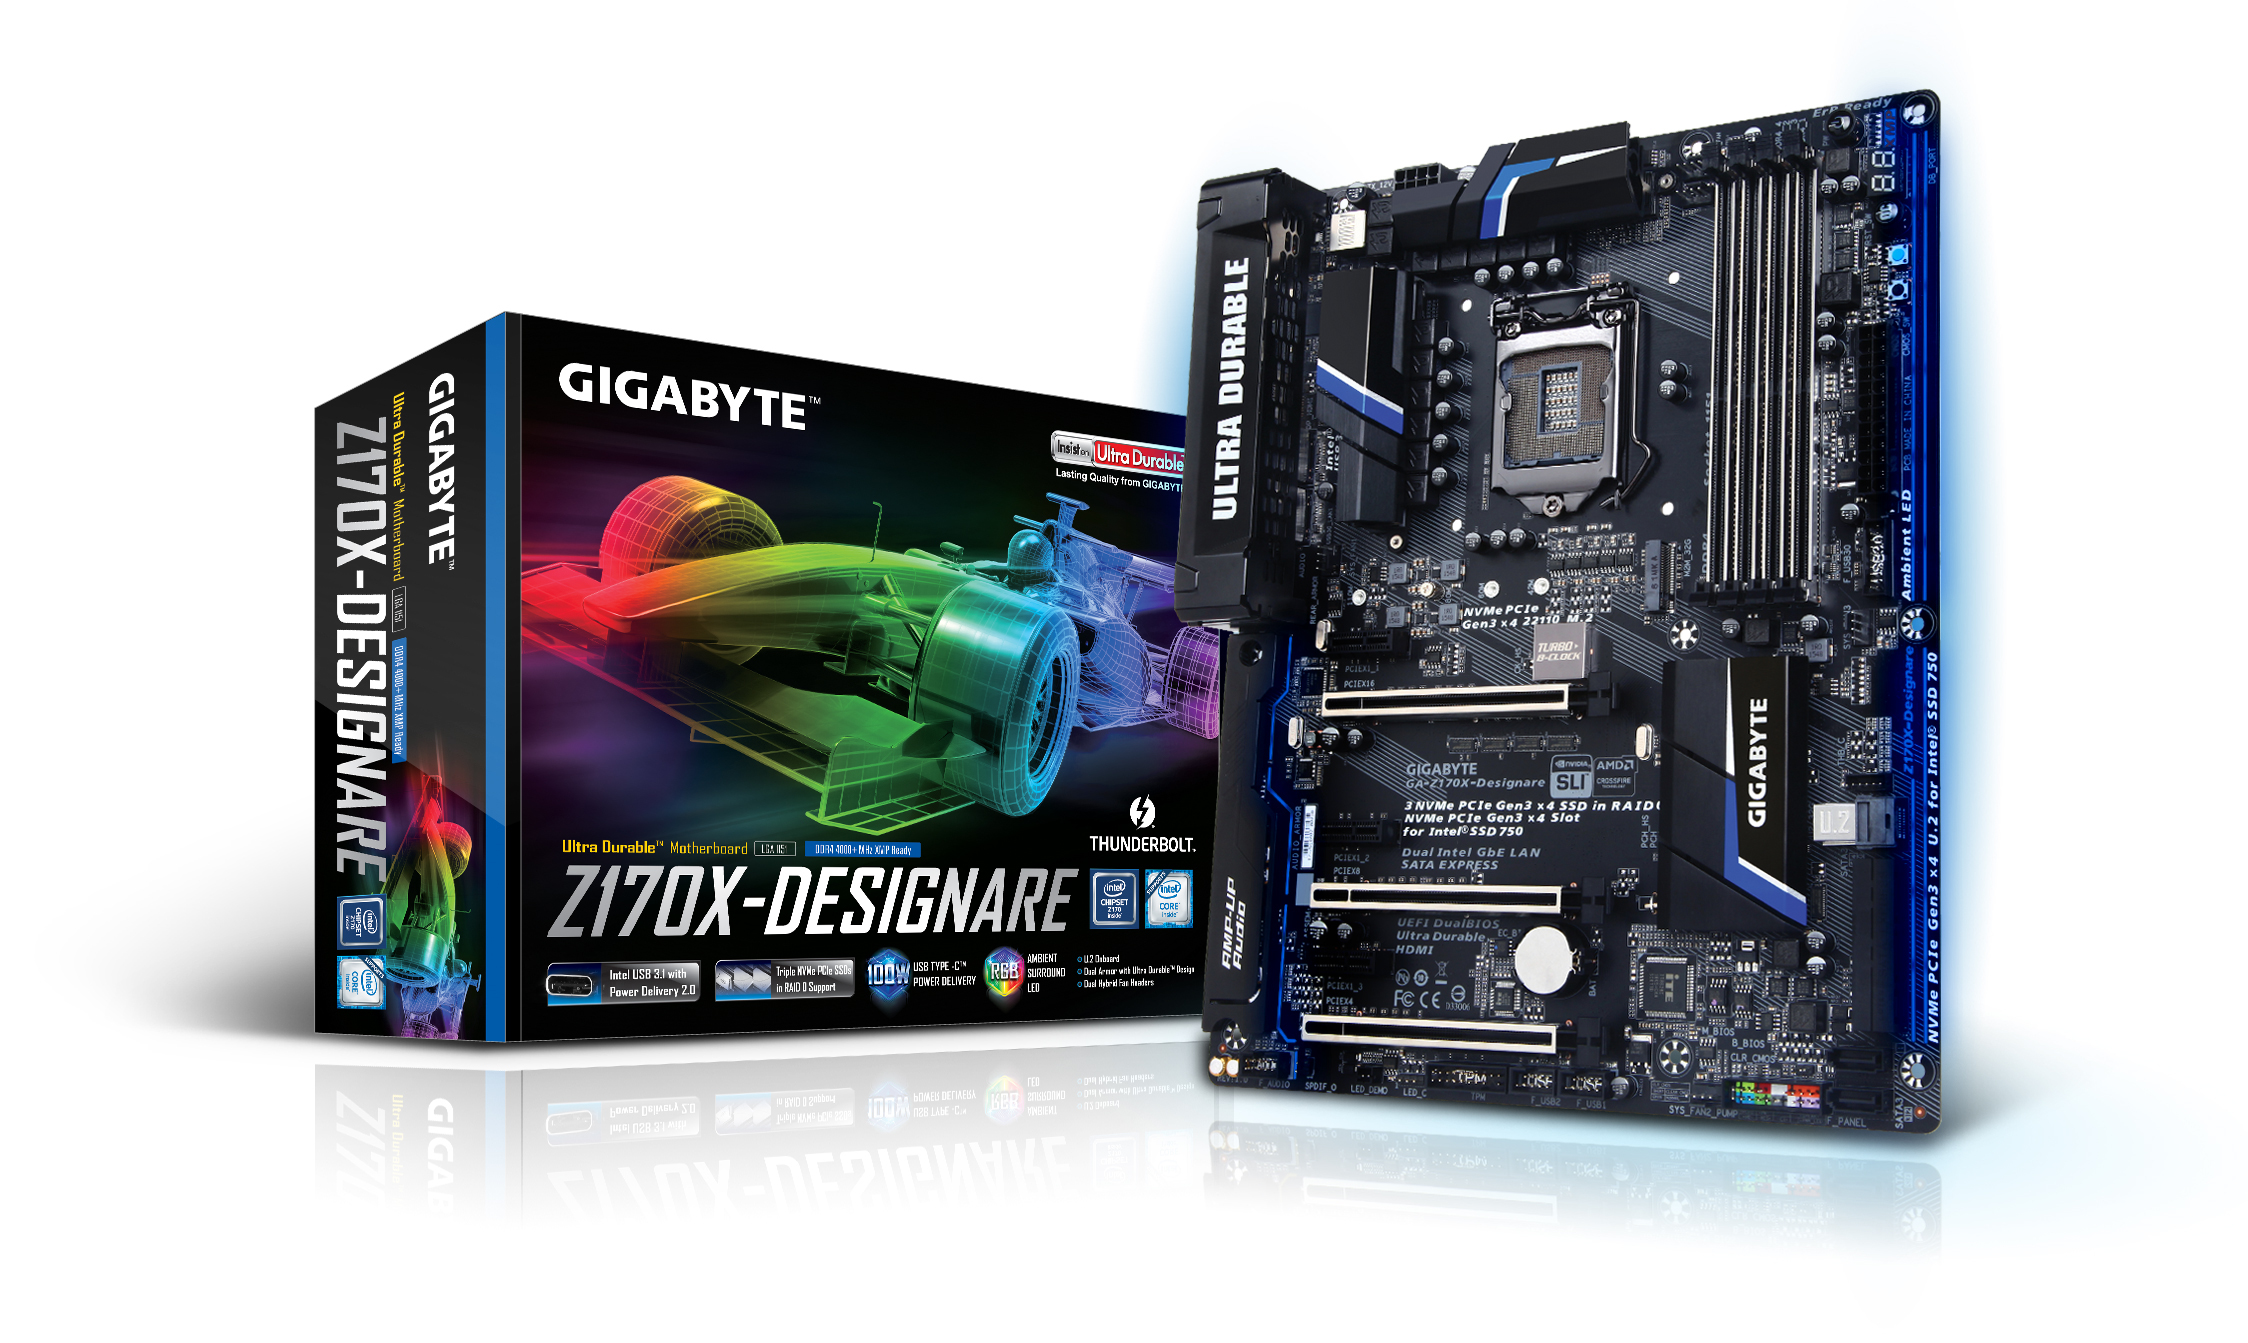 Specifically for designers to create motherboards